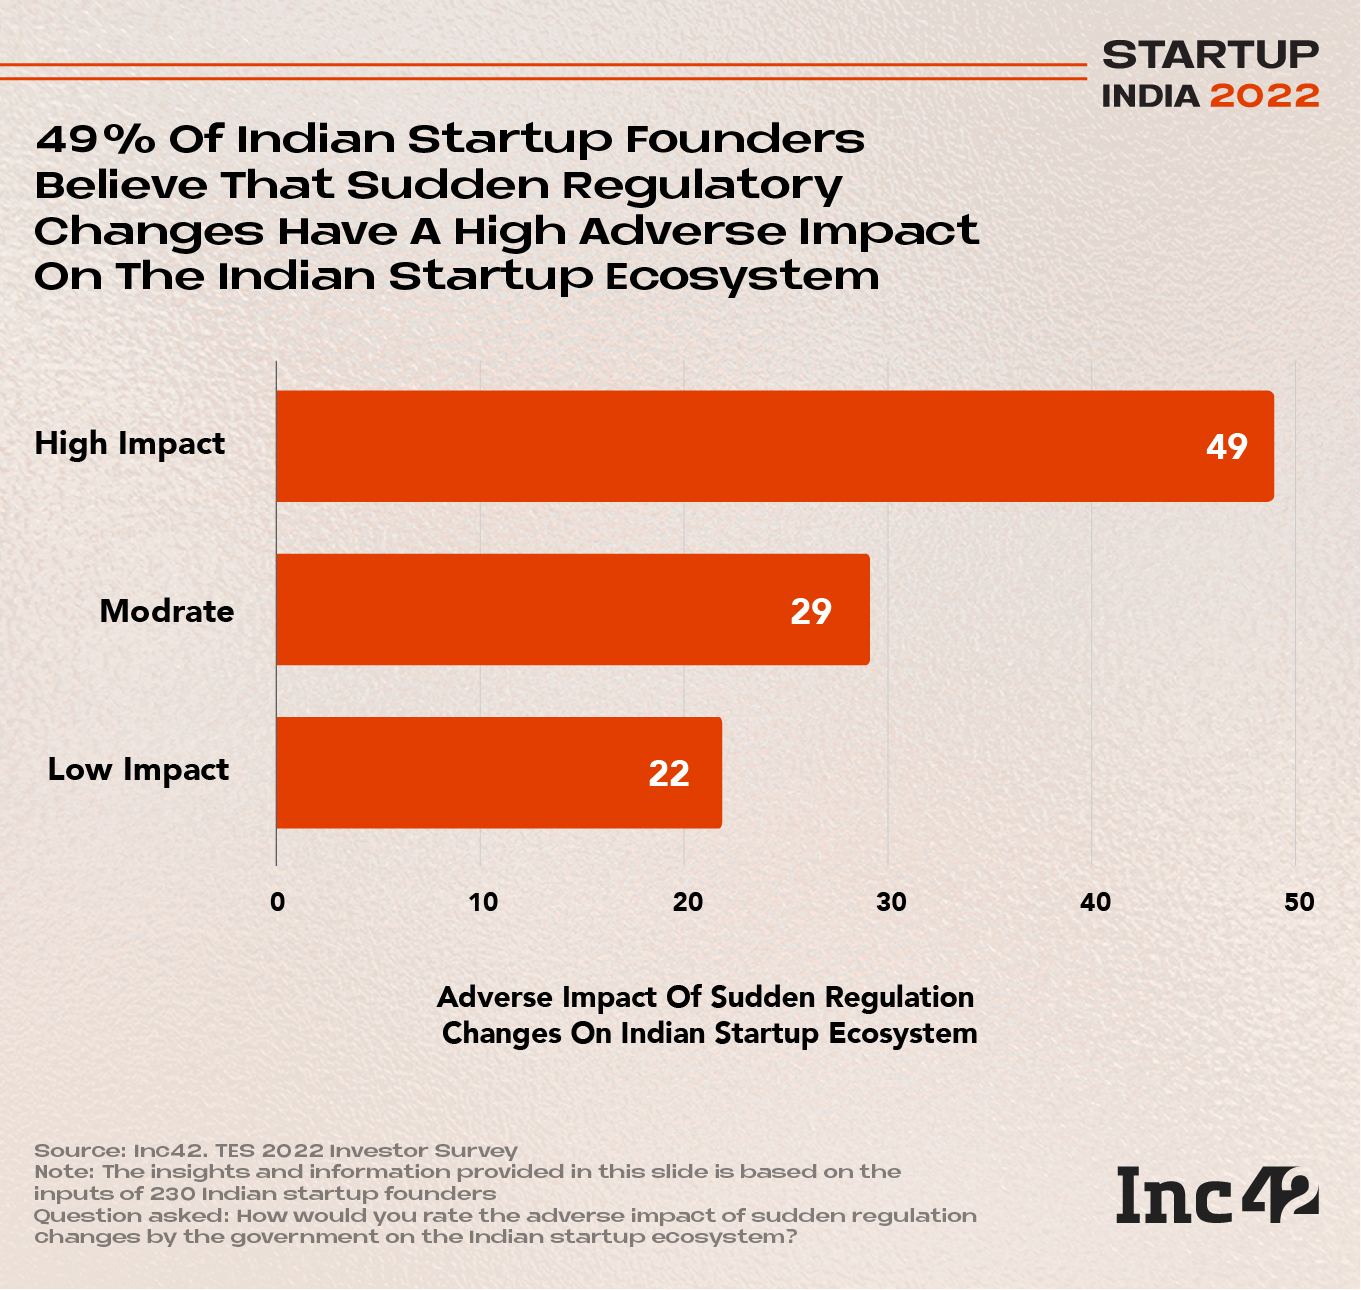 49% of Indian startups founders believe that sudden regulatory changes